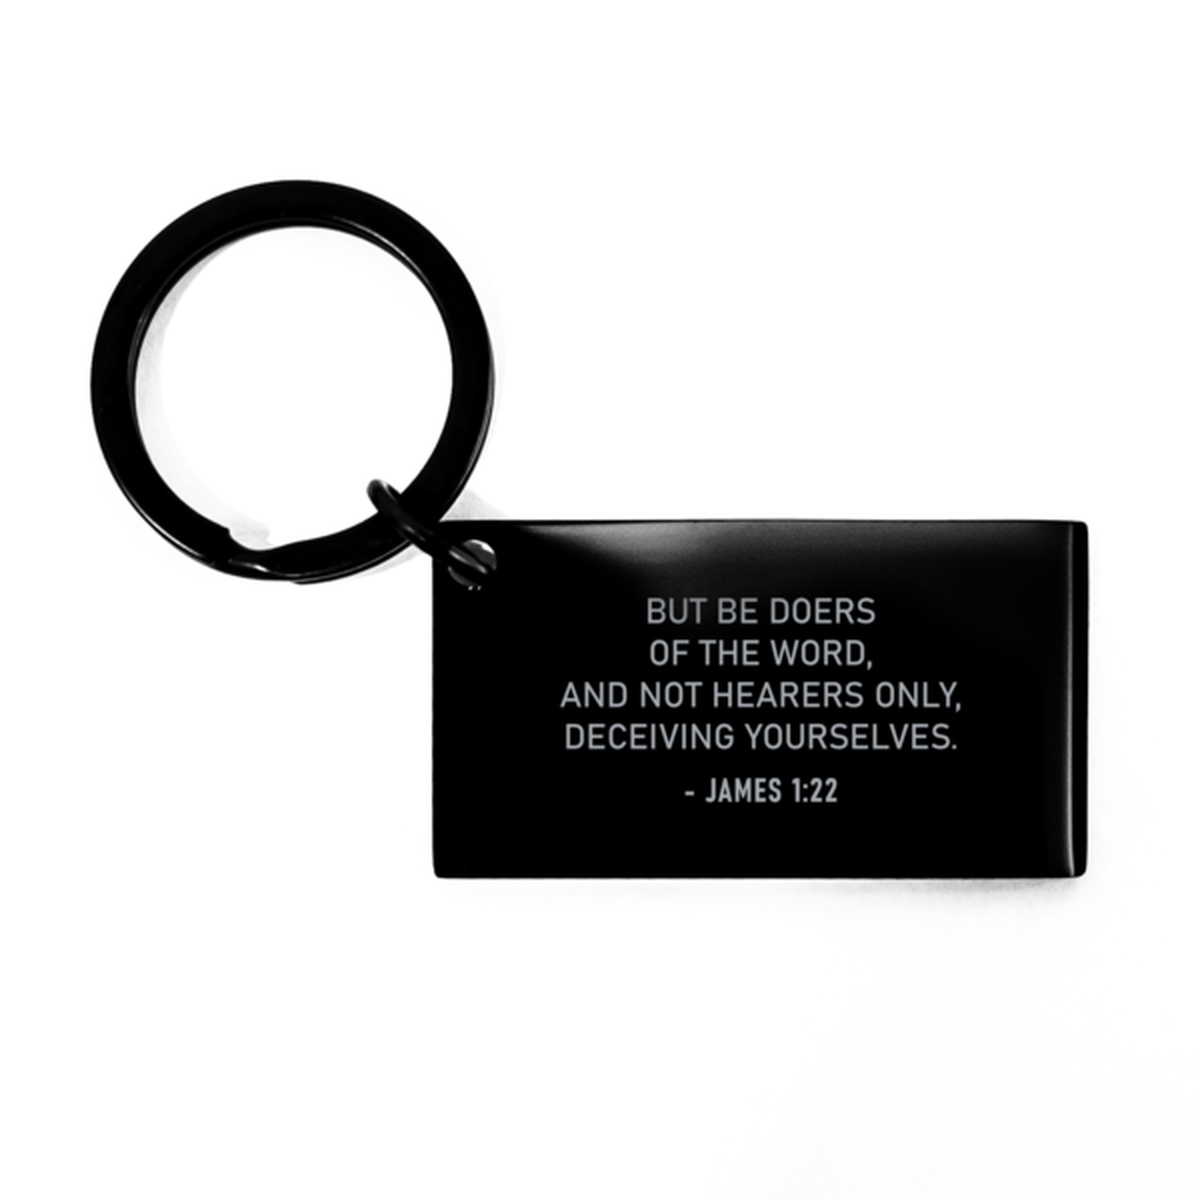 Bible Verse Black Keychain, James 1:22 But Be Doers Of The Word, And Not Hearers Only, Christian Inspirational Key Ring Gifts For Men Women